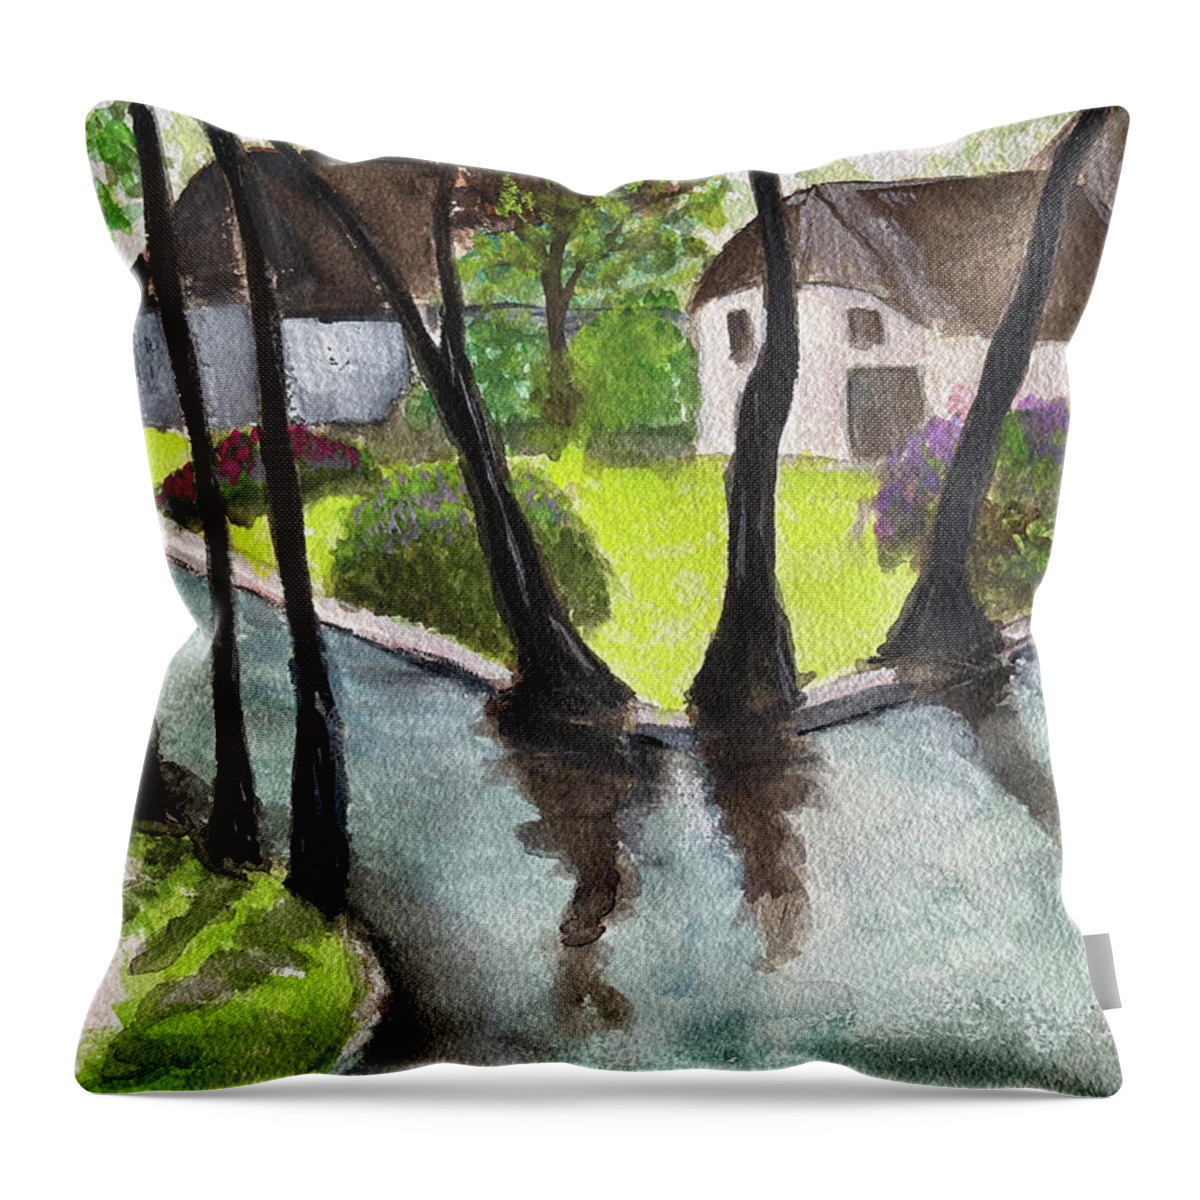 Netherlands Throw Pillow featuring the painting Giethoorn Netherlands Landscape by Roxy Rich